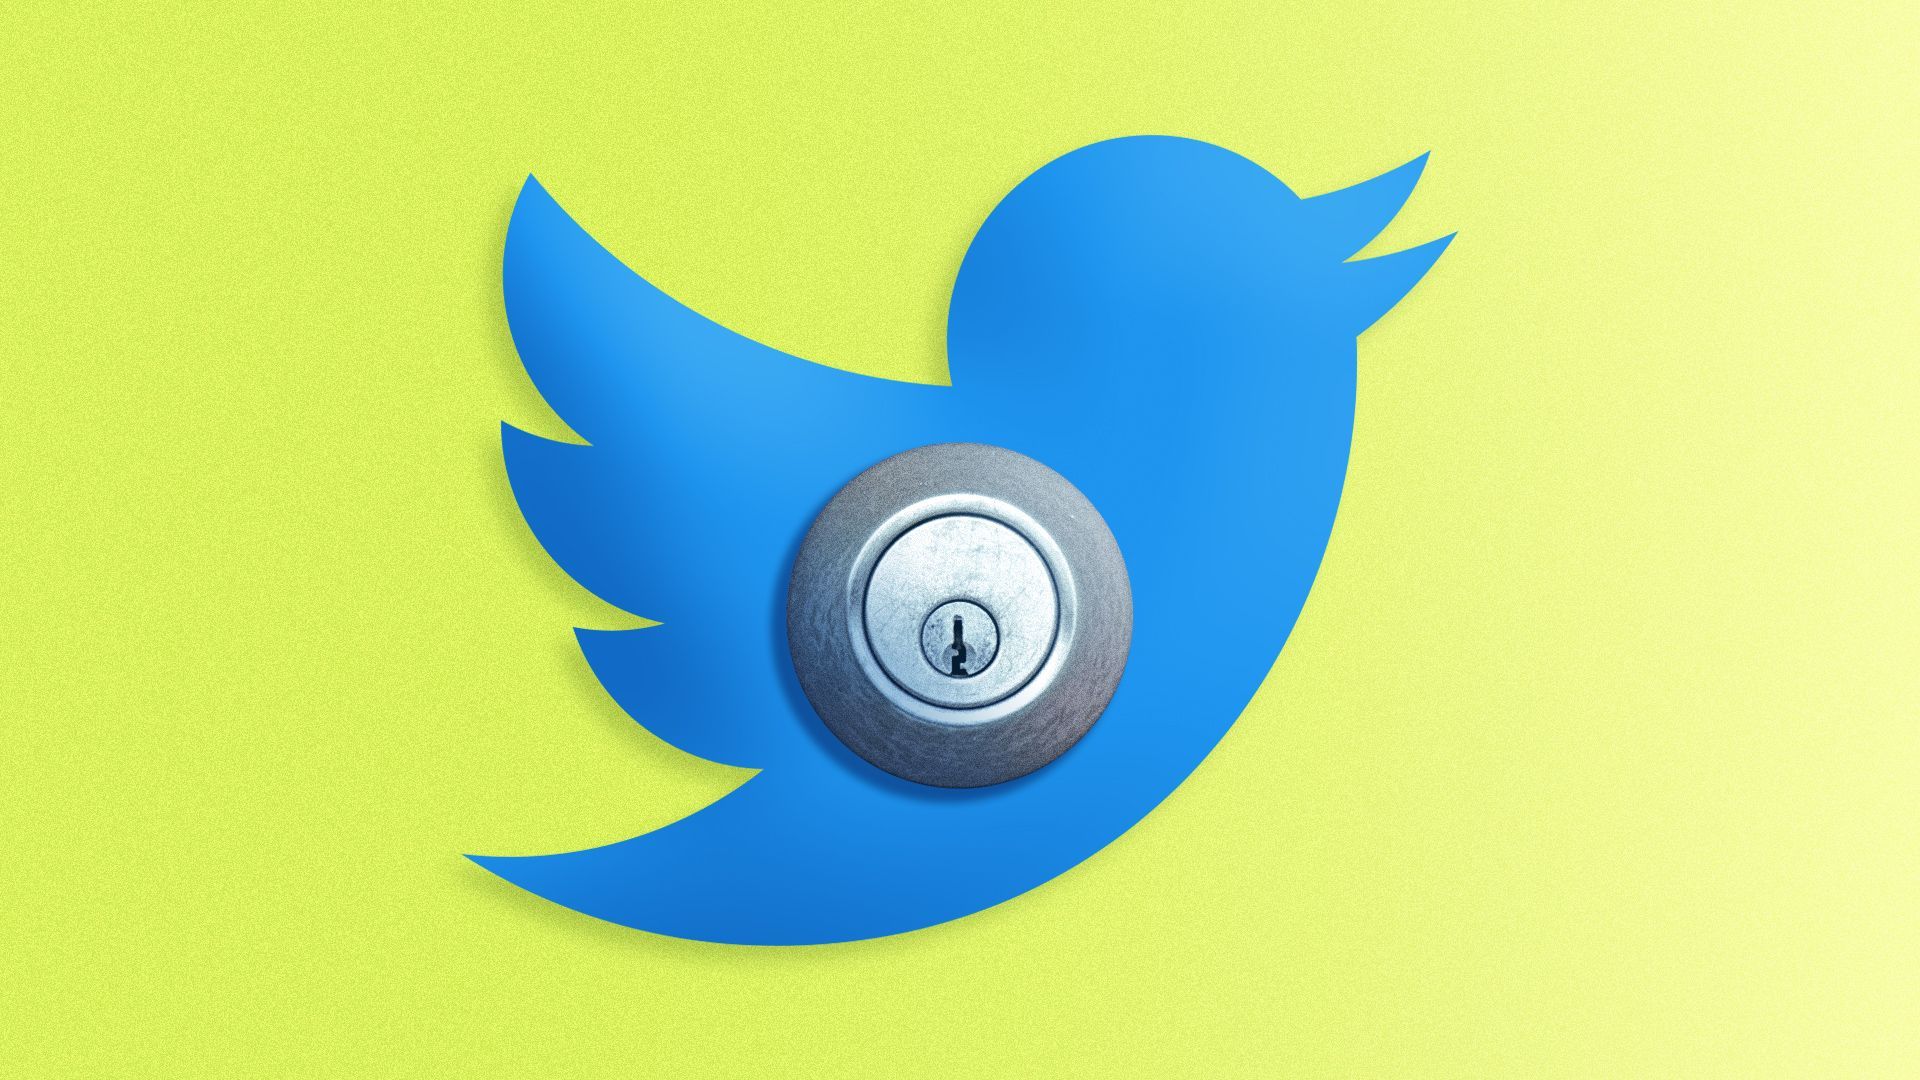 Illustration of the Twitter logo with a steel door lock.